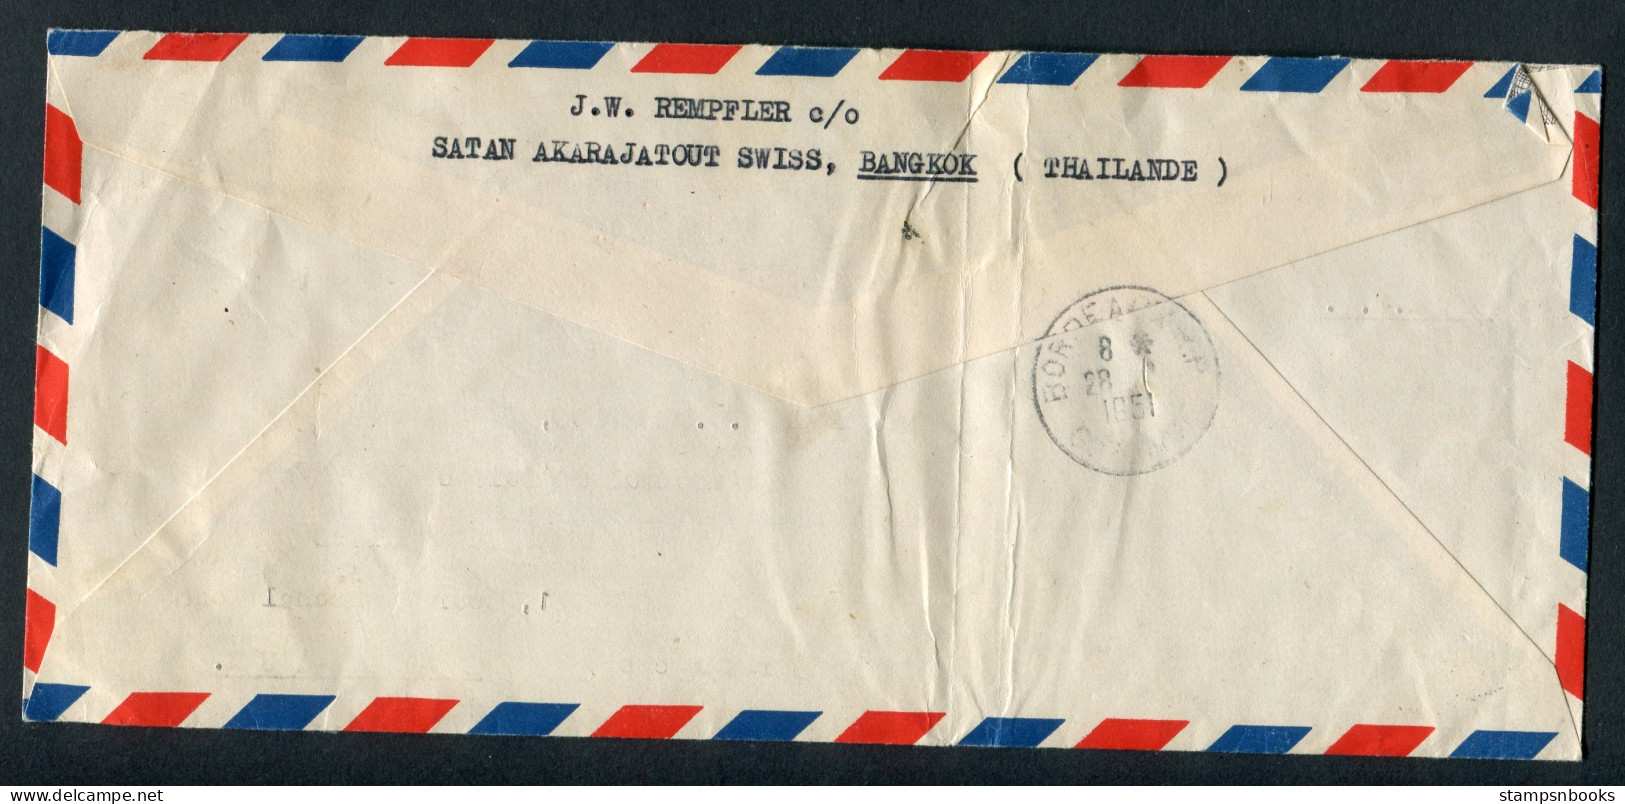 1951 Thailand Siam Registered Bangkok KLM Airmail Cover - Swiss Consulate, Bordeaux France, Switzerland Diplomatic - Thailand